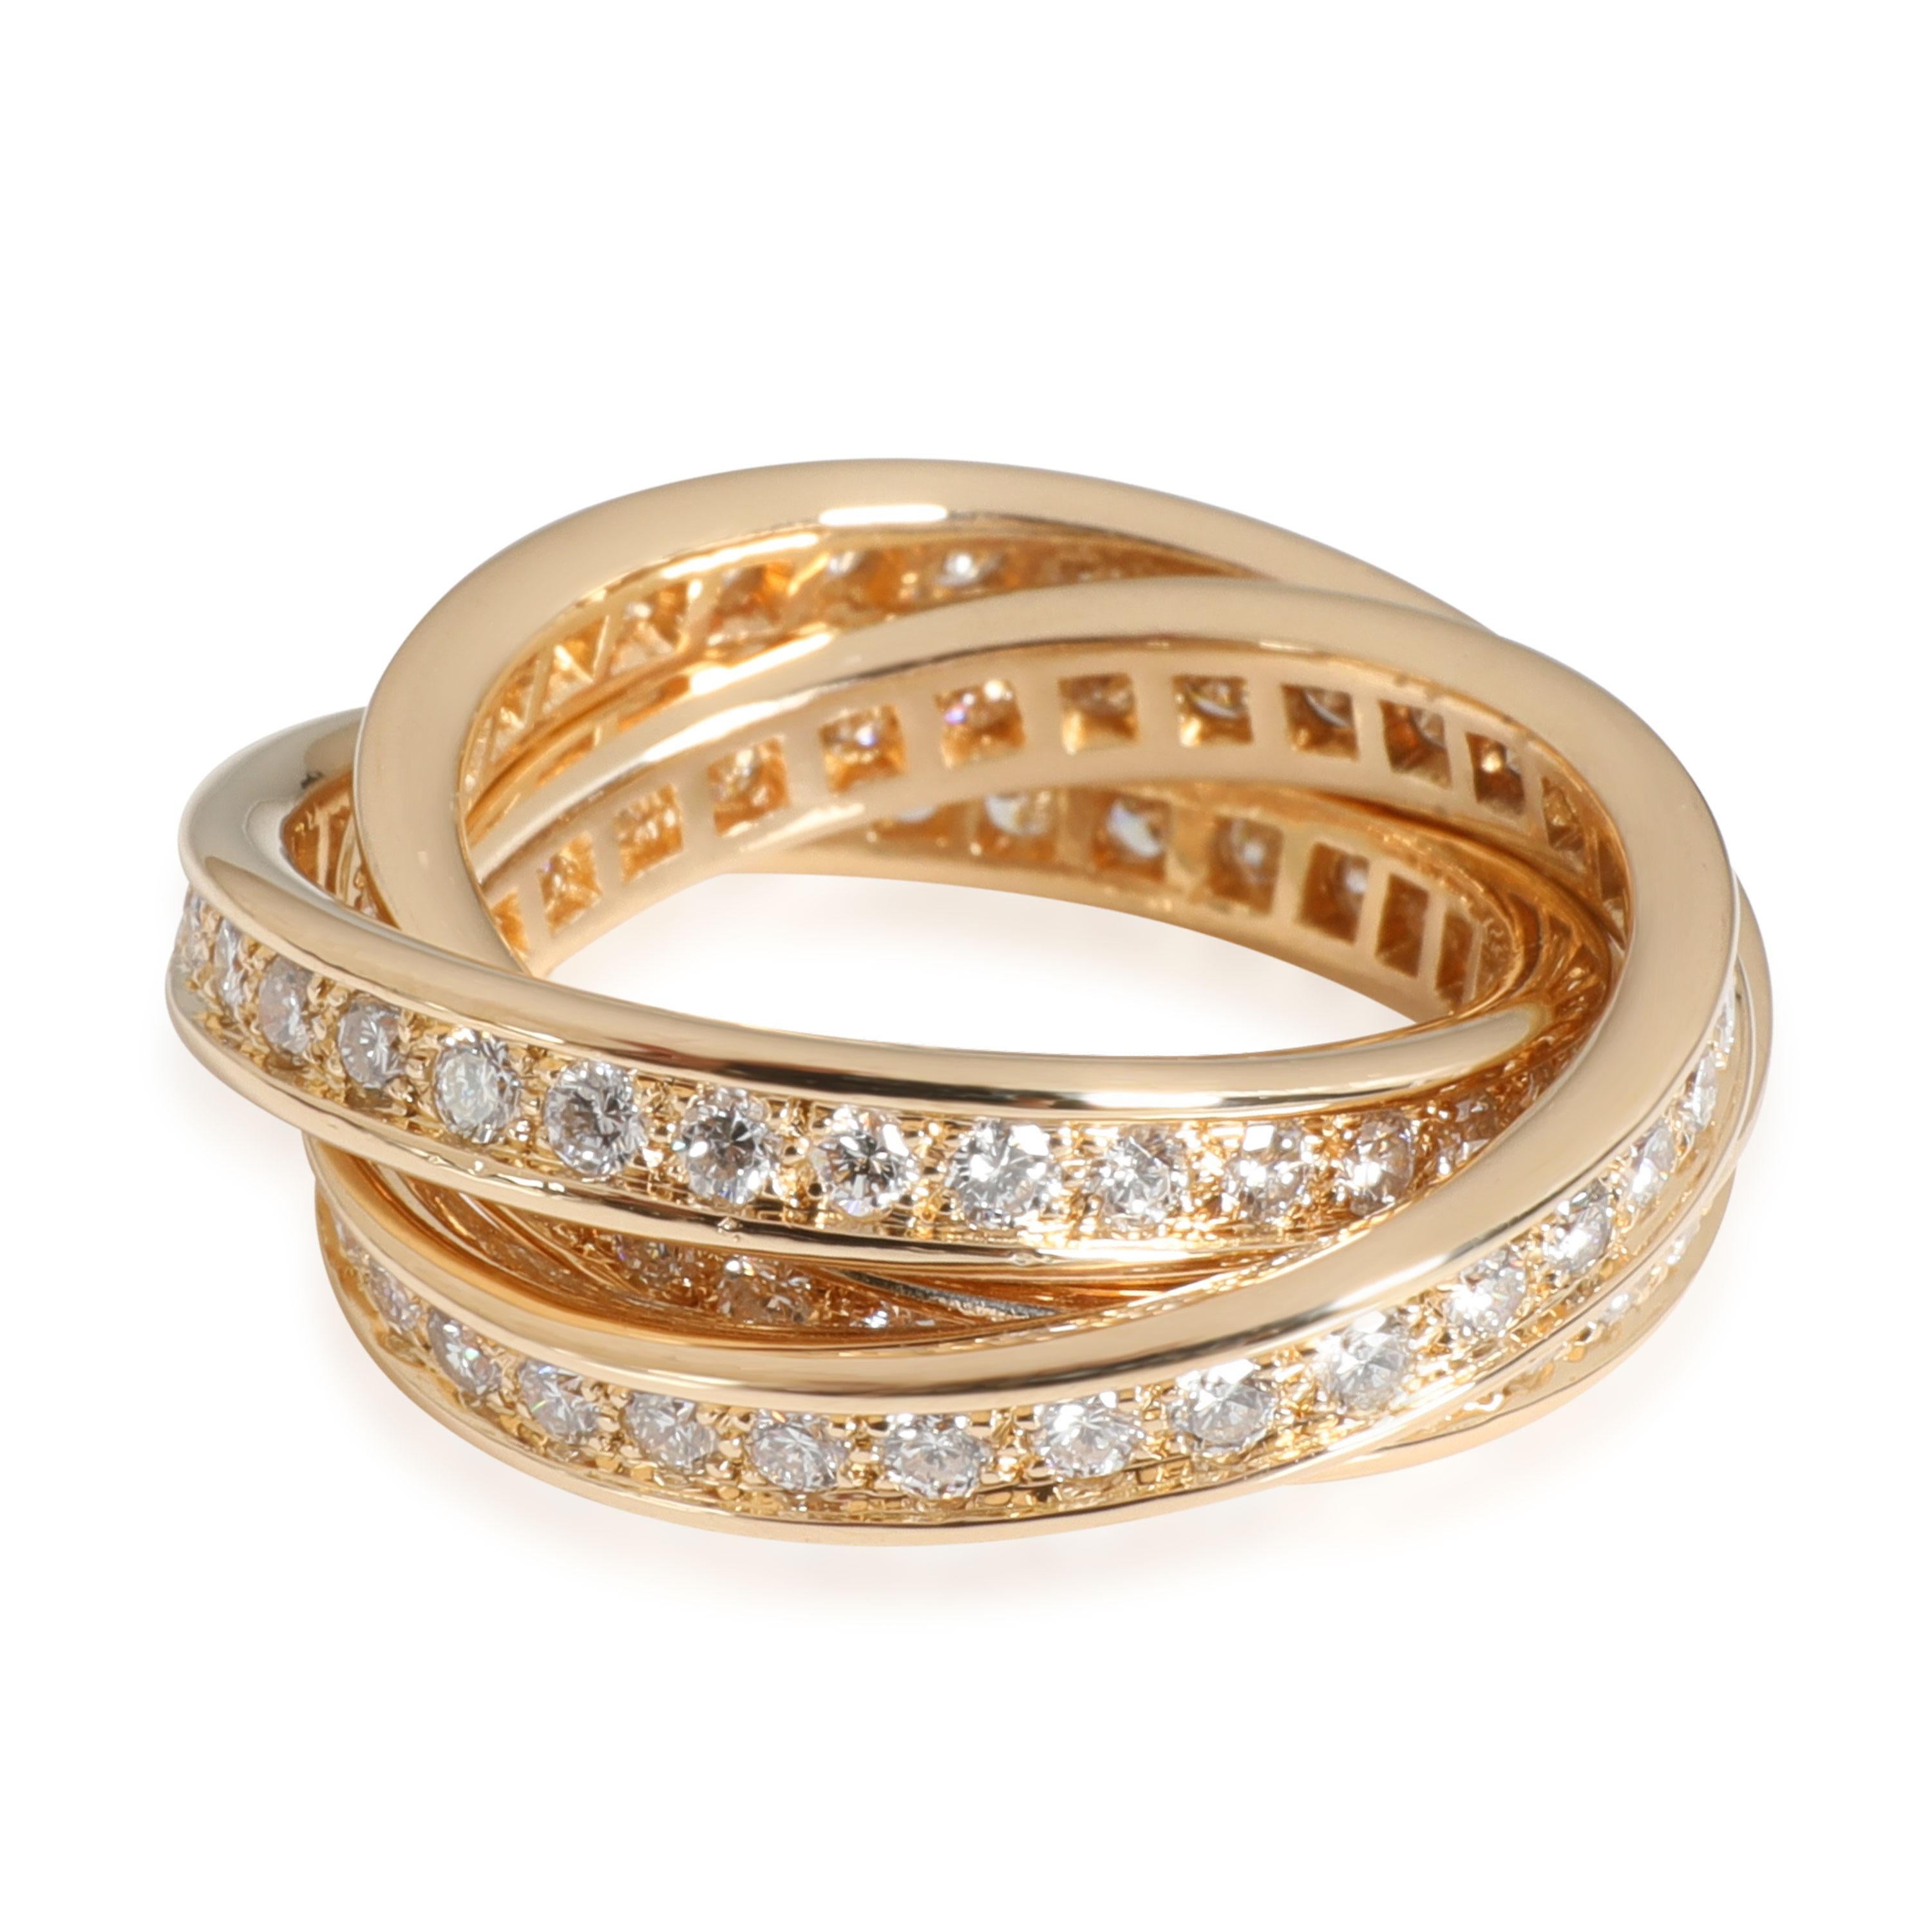 Cartier Vintage Trinity Diamond Ring in 18k 3 Tone Gold 1.75 CTW For ...